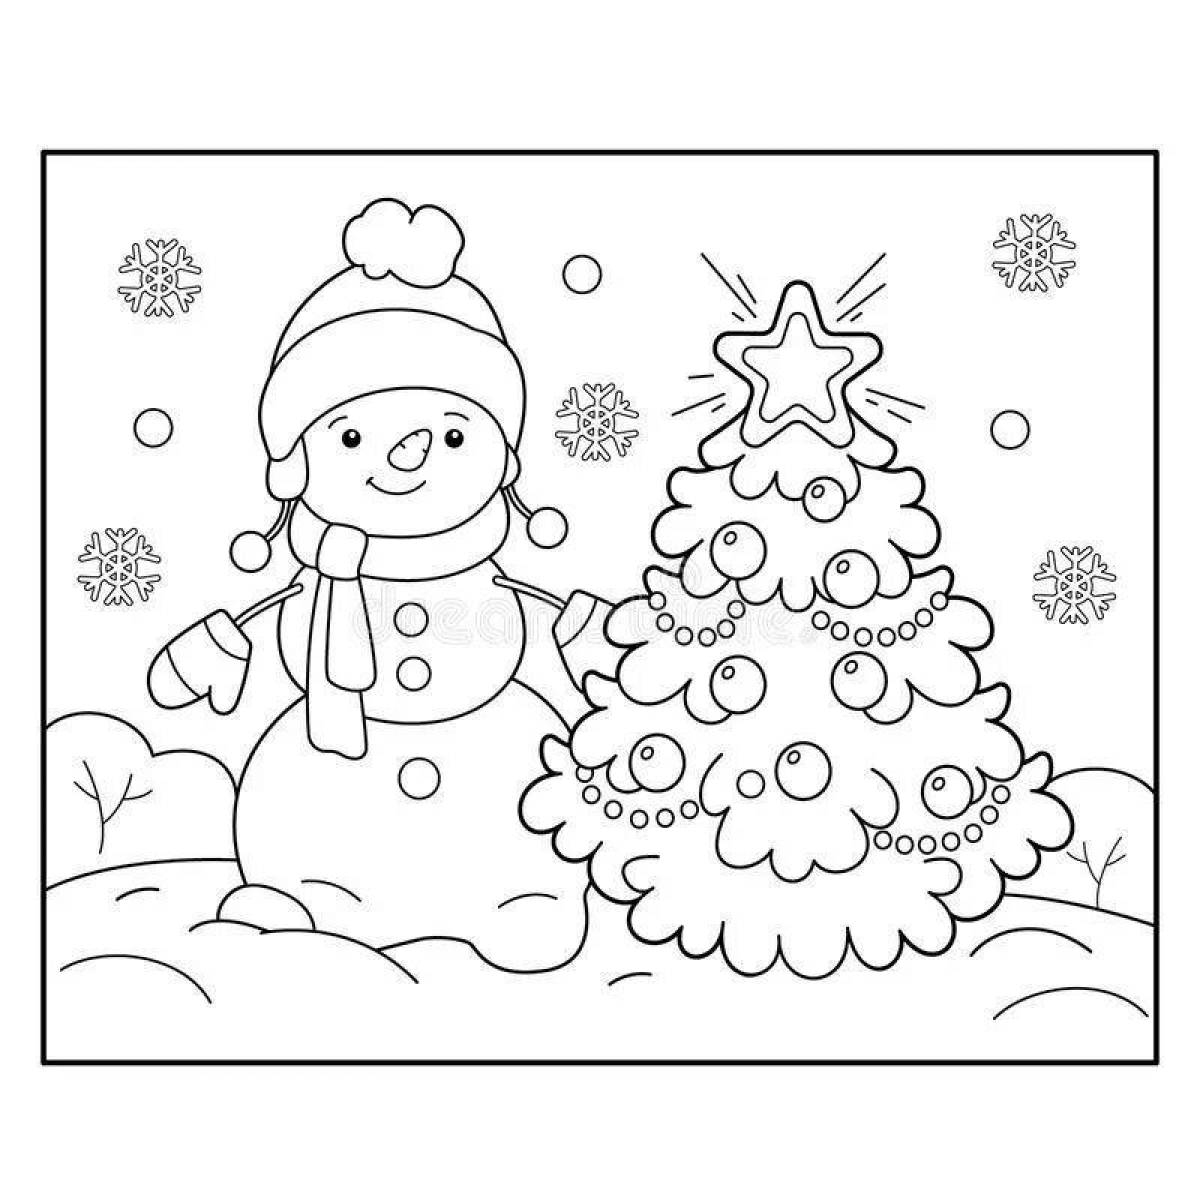 Coloring book funny tree and snowman